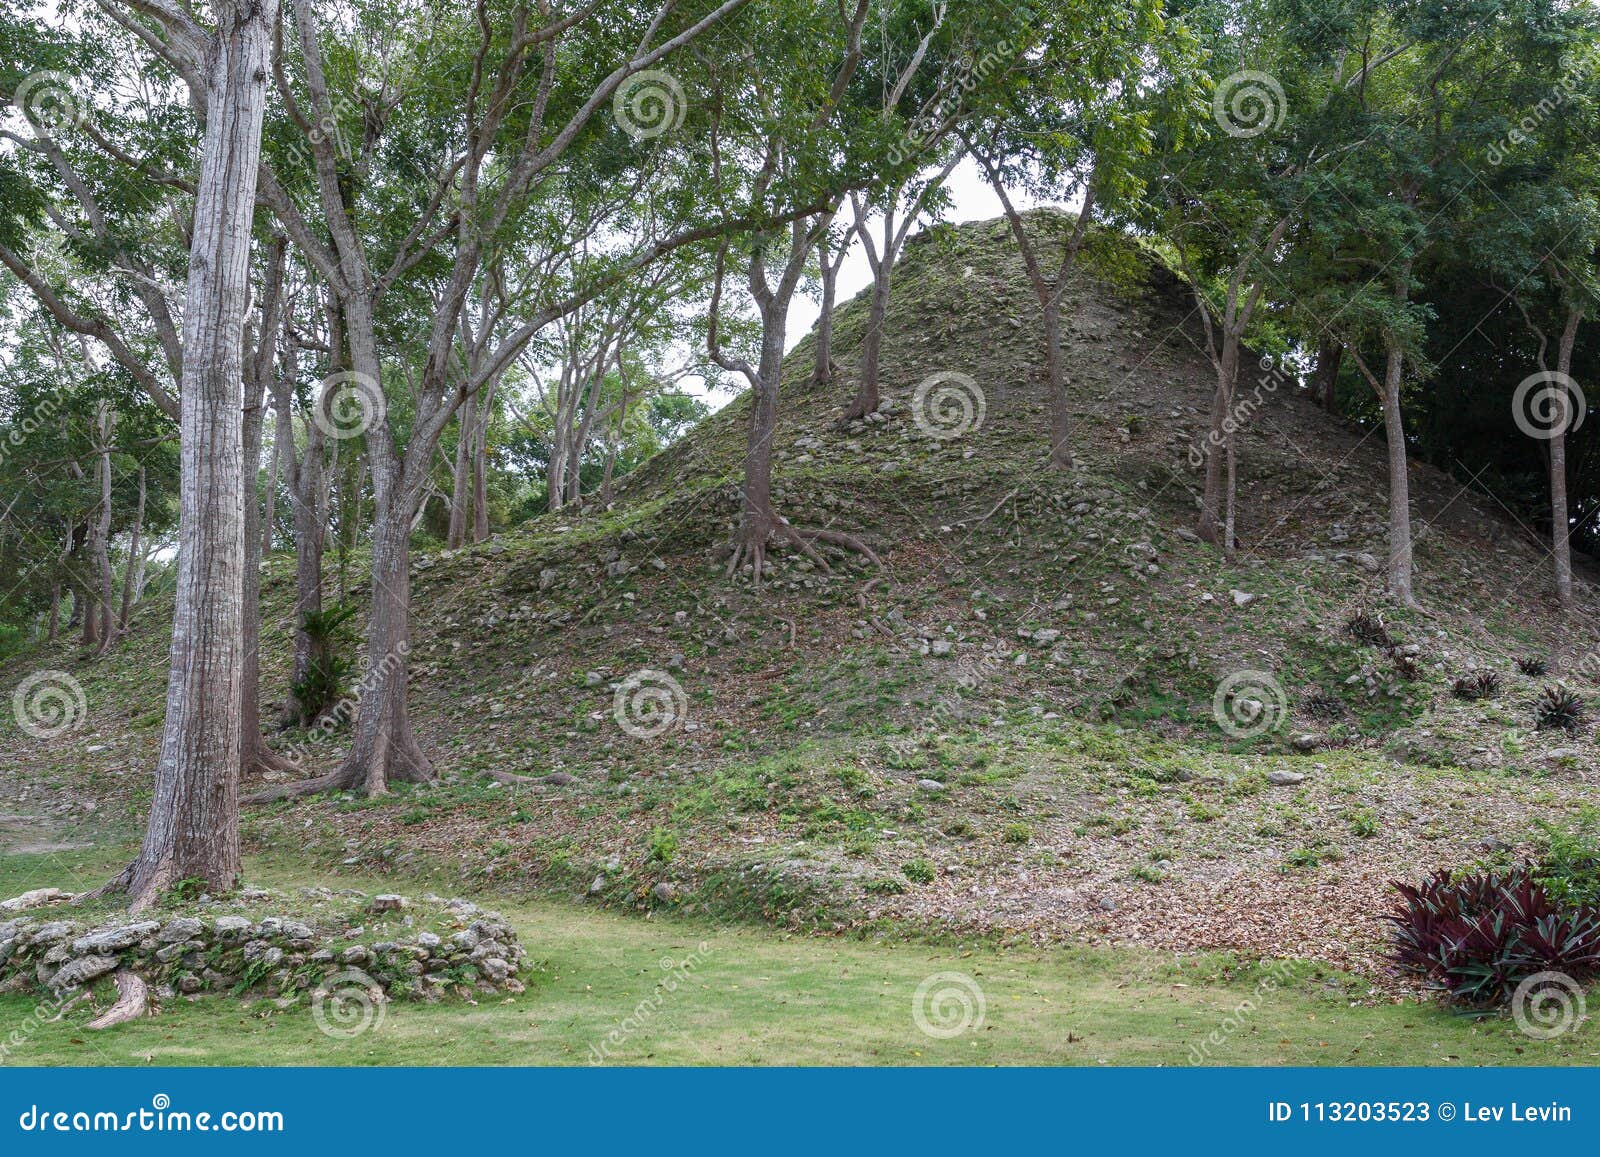 ruins of the ancient mayan town cerros